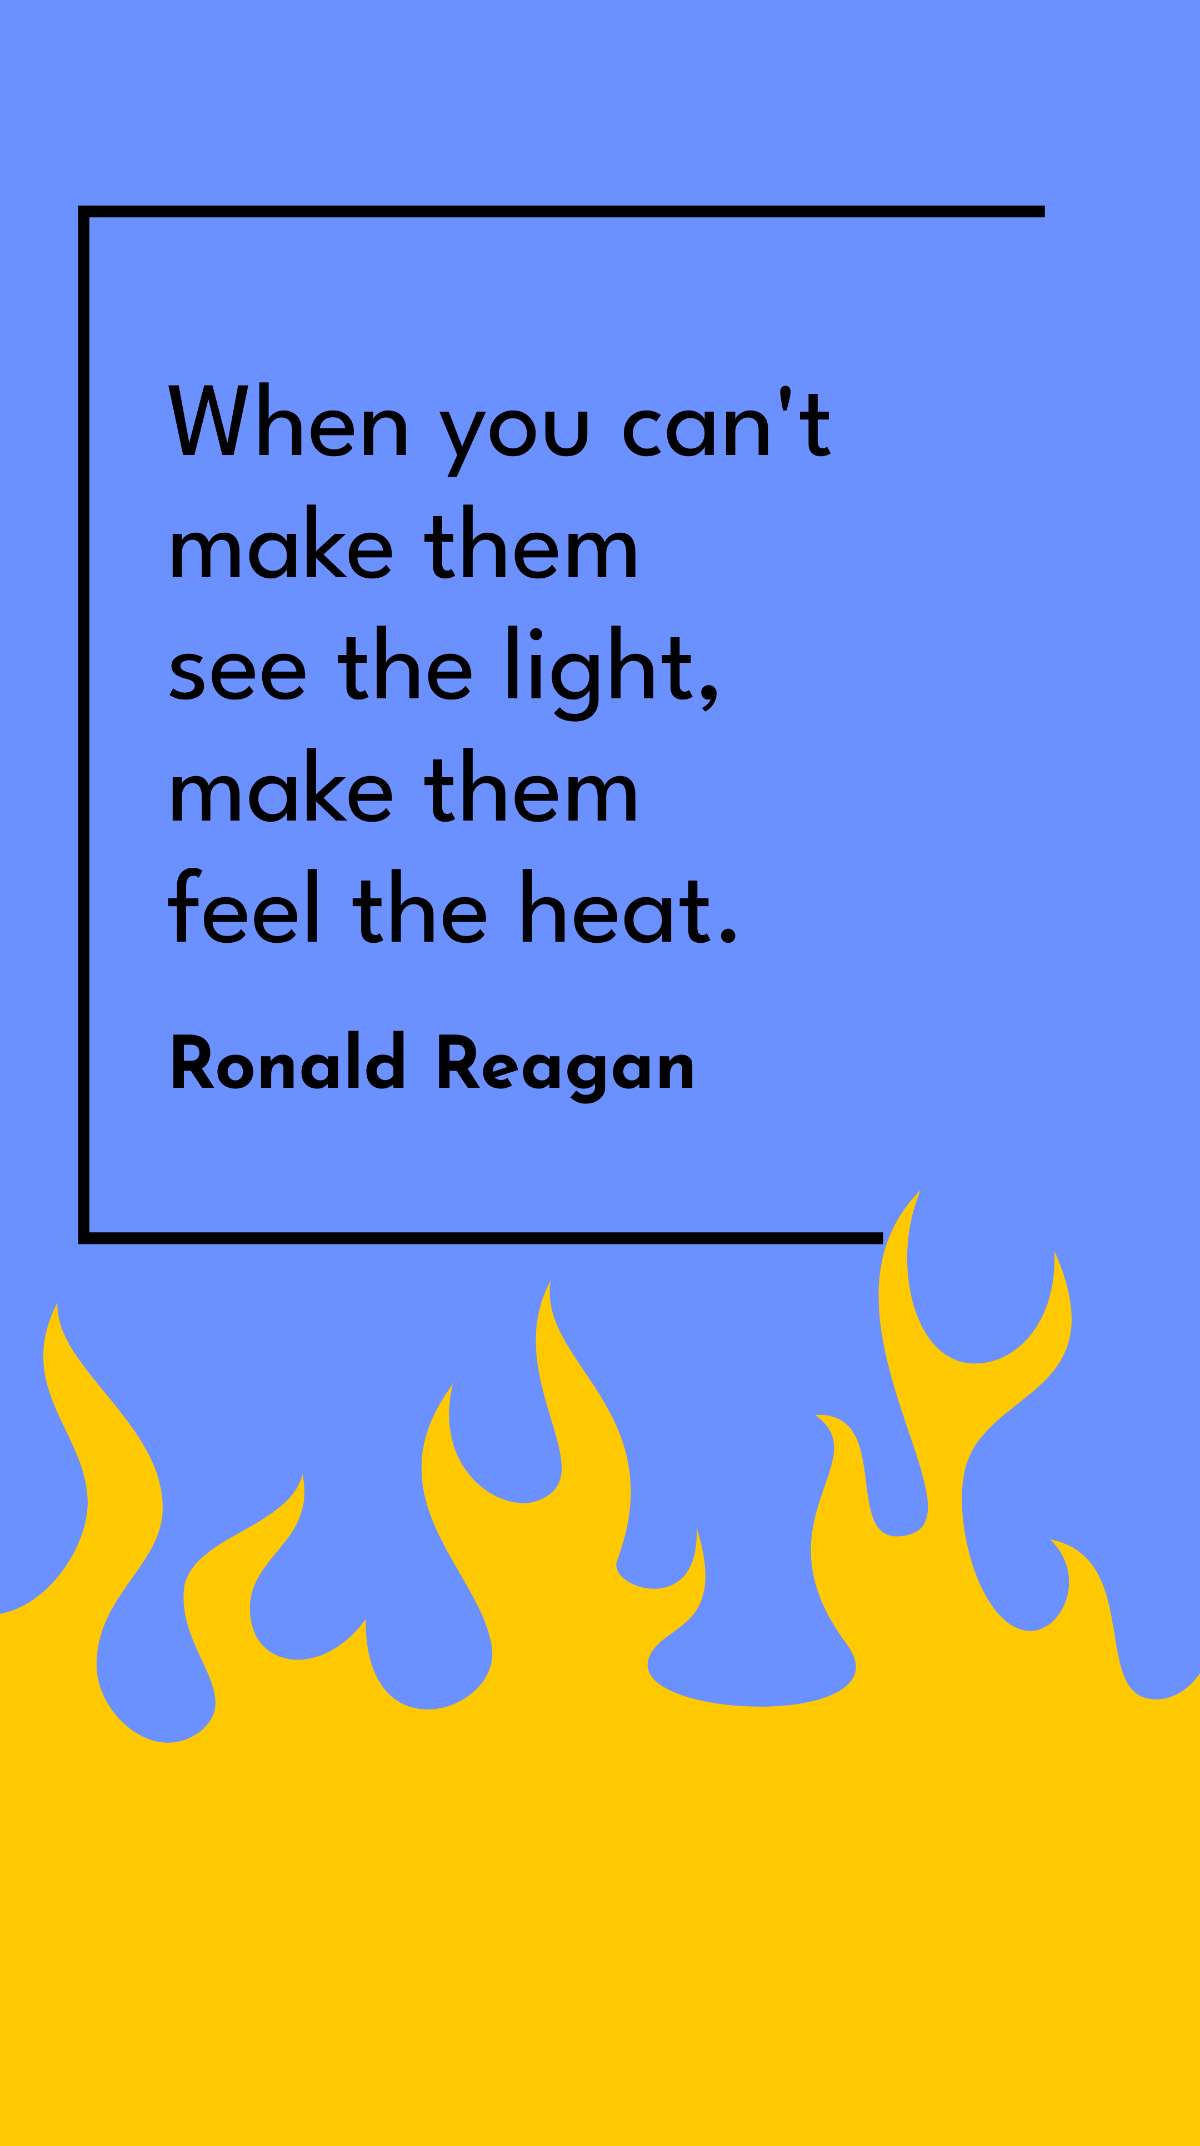 Ronald Reagan - When you can't make them see the light, make them feel the heat. Template